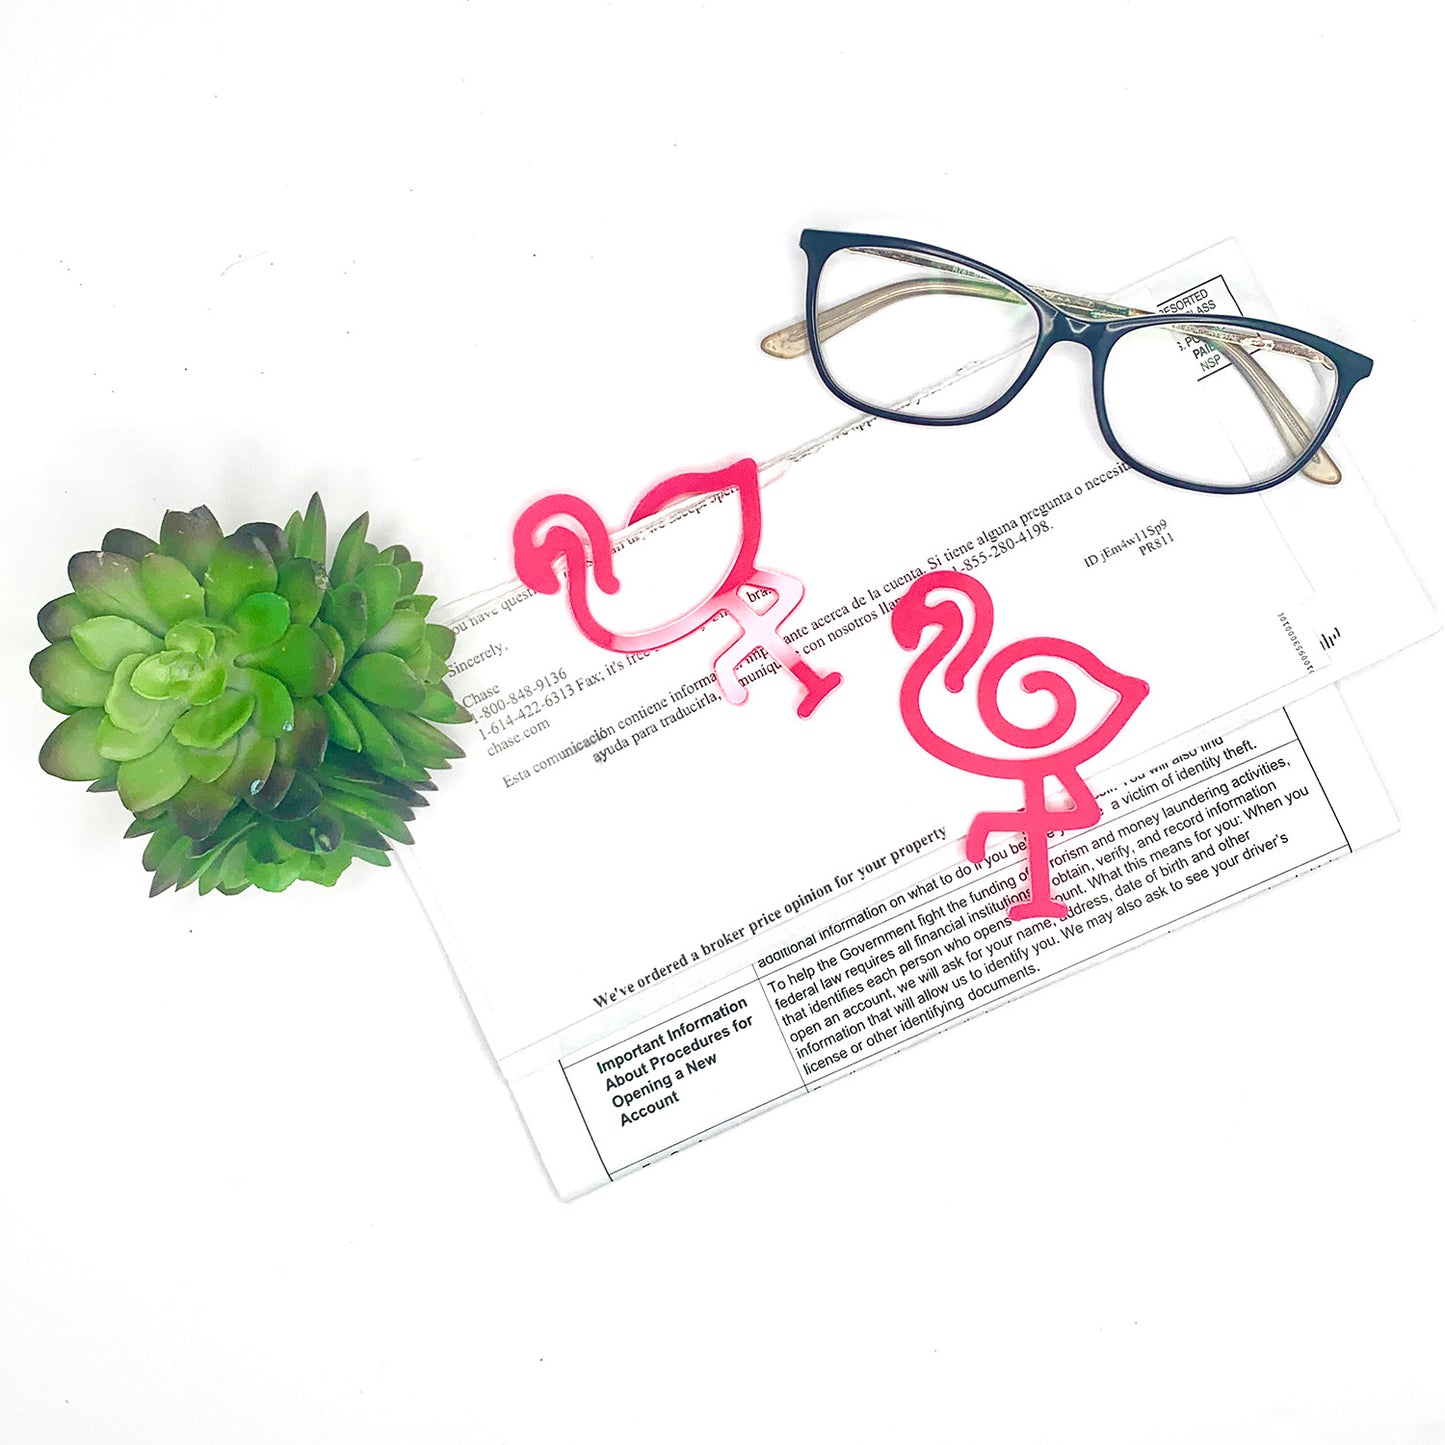 Flamingo-Shaped Bookmark with Card Backer - Paperclip - Snack Bag Closure